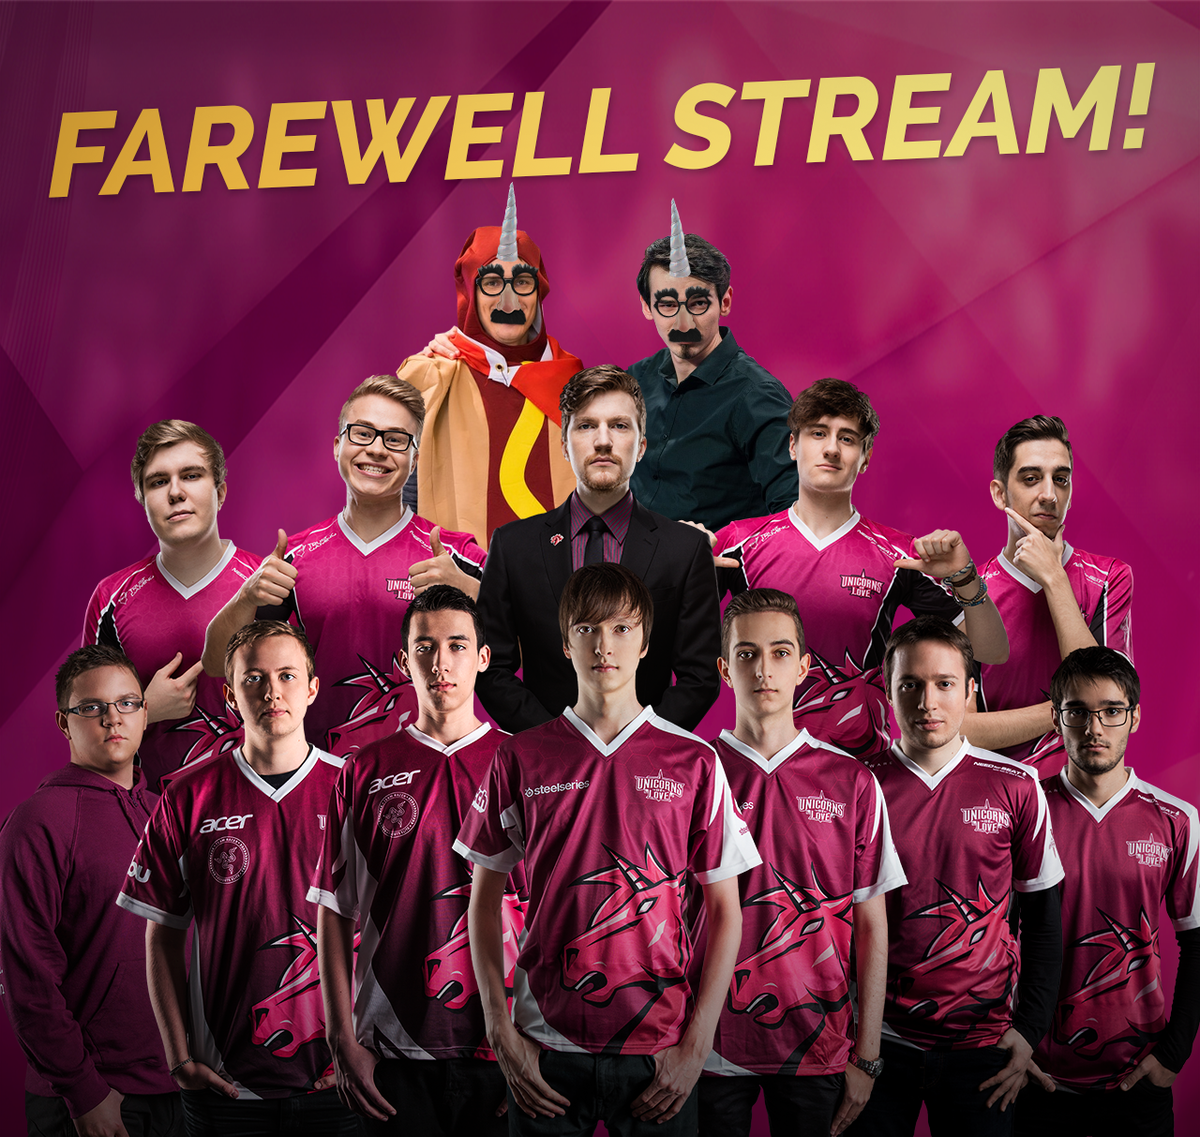 Unicorns Of Love On Twitter Unicorns We Re Streaming Tomorrow At 8pm Cet Our Old Players Latest Roster And Academy Team Will Fight Each Others In 4 Friendly In House Games There Is Even Unicorns of love is european organization. we re streaming tomorrow at 8pm cet